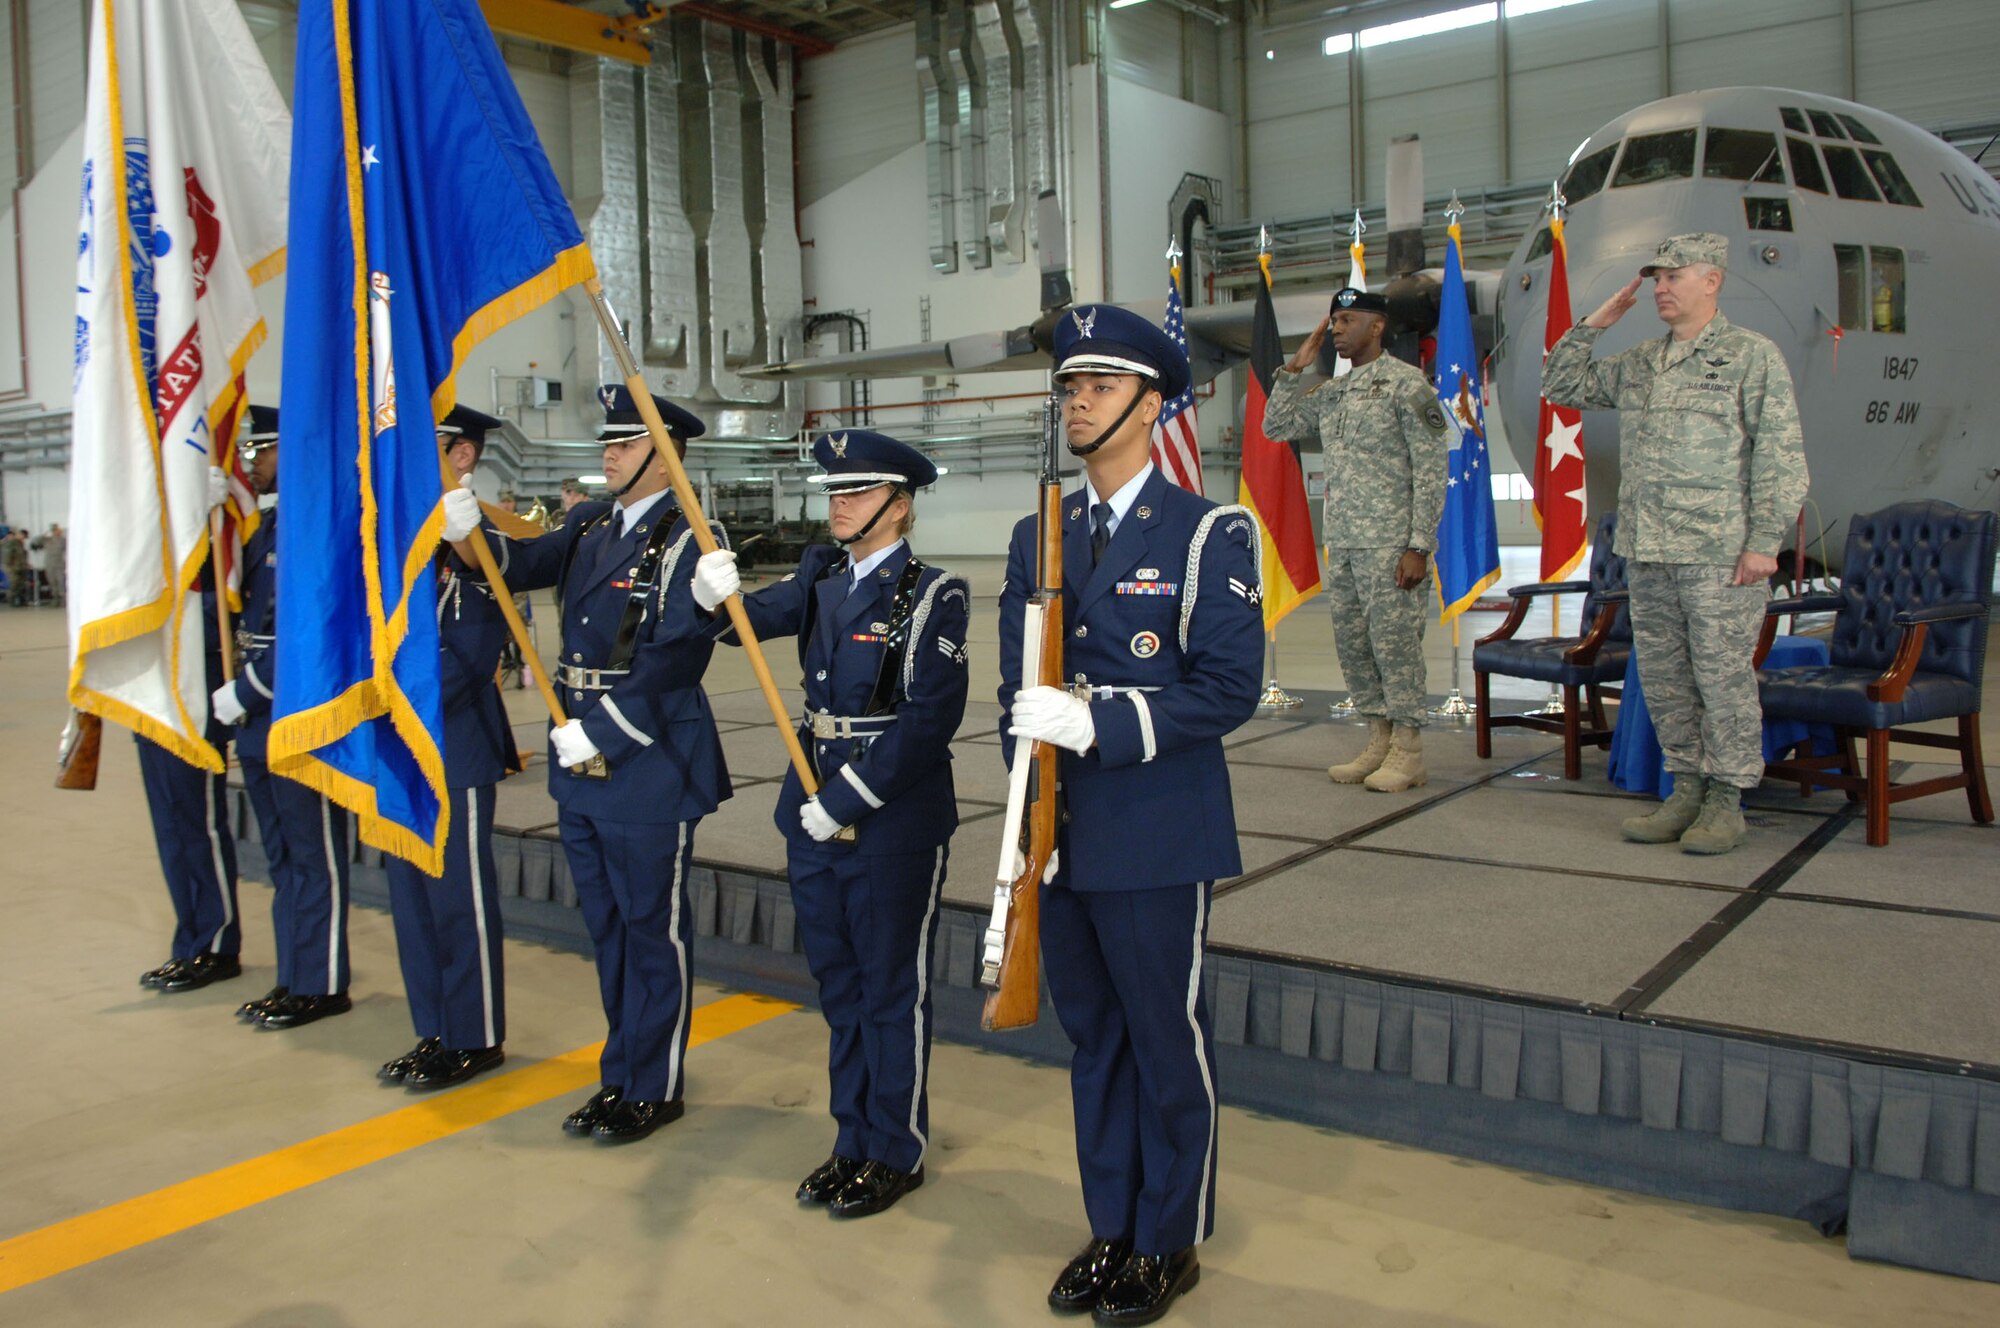 U.S. African Command Commander Army Gen. William E. "Kip" Ward (left) and Air Force Maj. Gen. Ronald R. Ladnier, commander of Seventeenth Air Force, salute the colors as the national anthem is sung during an assumption of command ceremony Sept. 18 at Ramstein Air base, Germany. General Ladnier took the guidon for Seventeenth Air Force, which officially activates Oct. 1 and will serve as the air component for U.S. (U.S. Air Force photo by Airman 1st Class Tony R. Ritter)(Released)